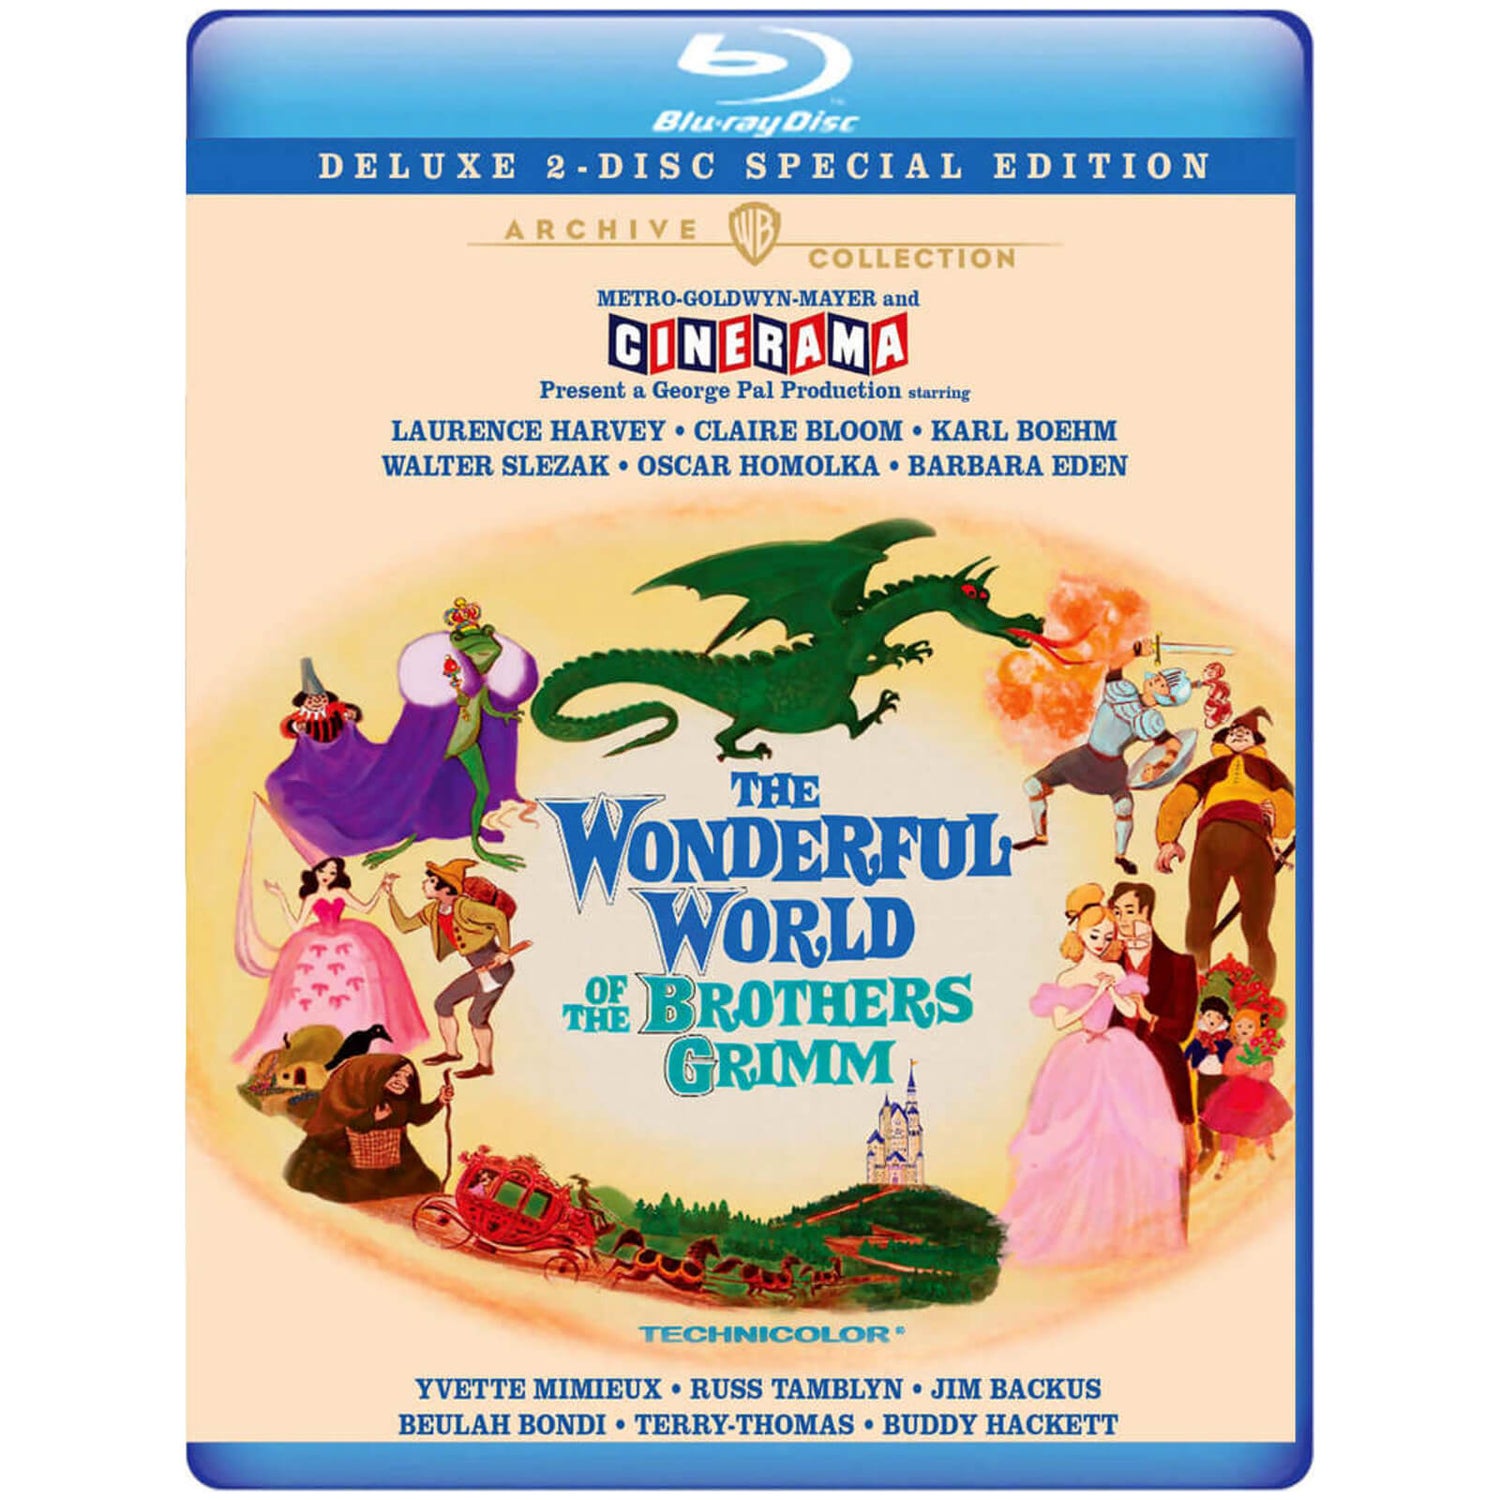 The Wonderful World of the Brothers Grimm: Deluxe 2-Disc Special Edition